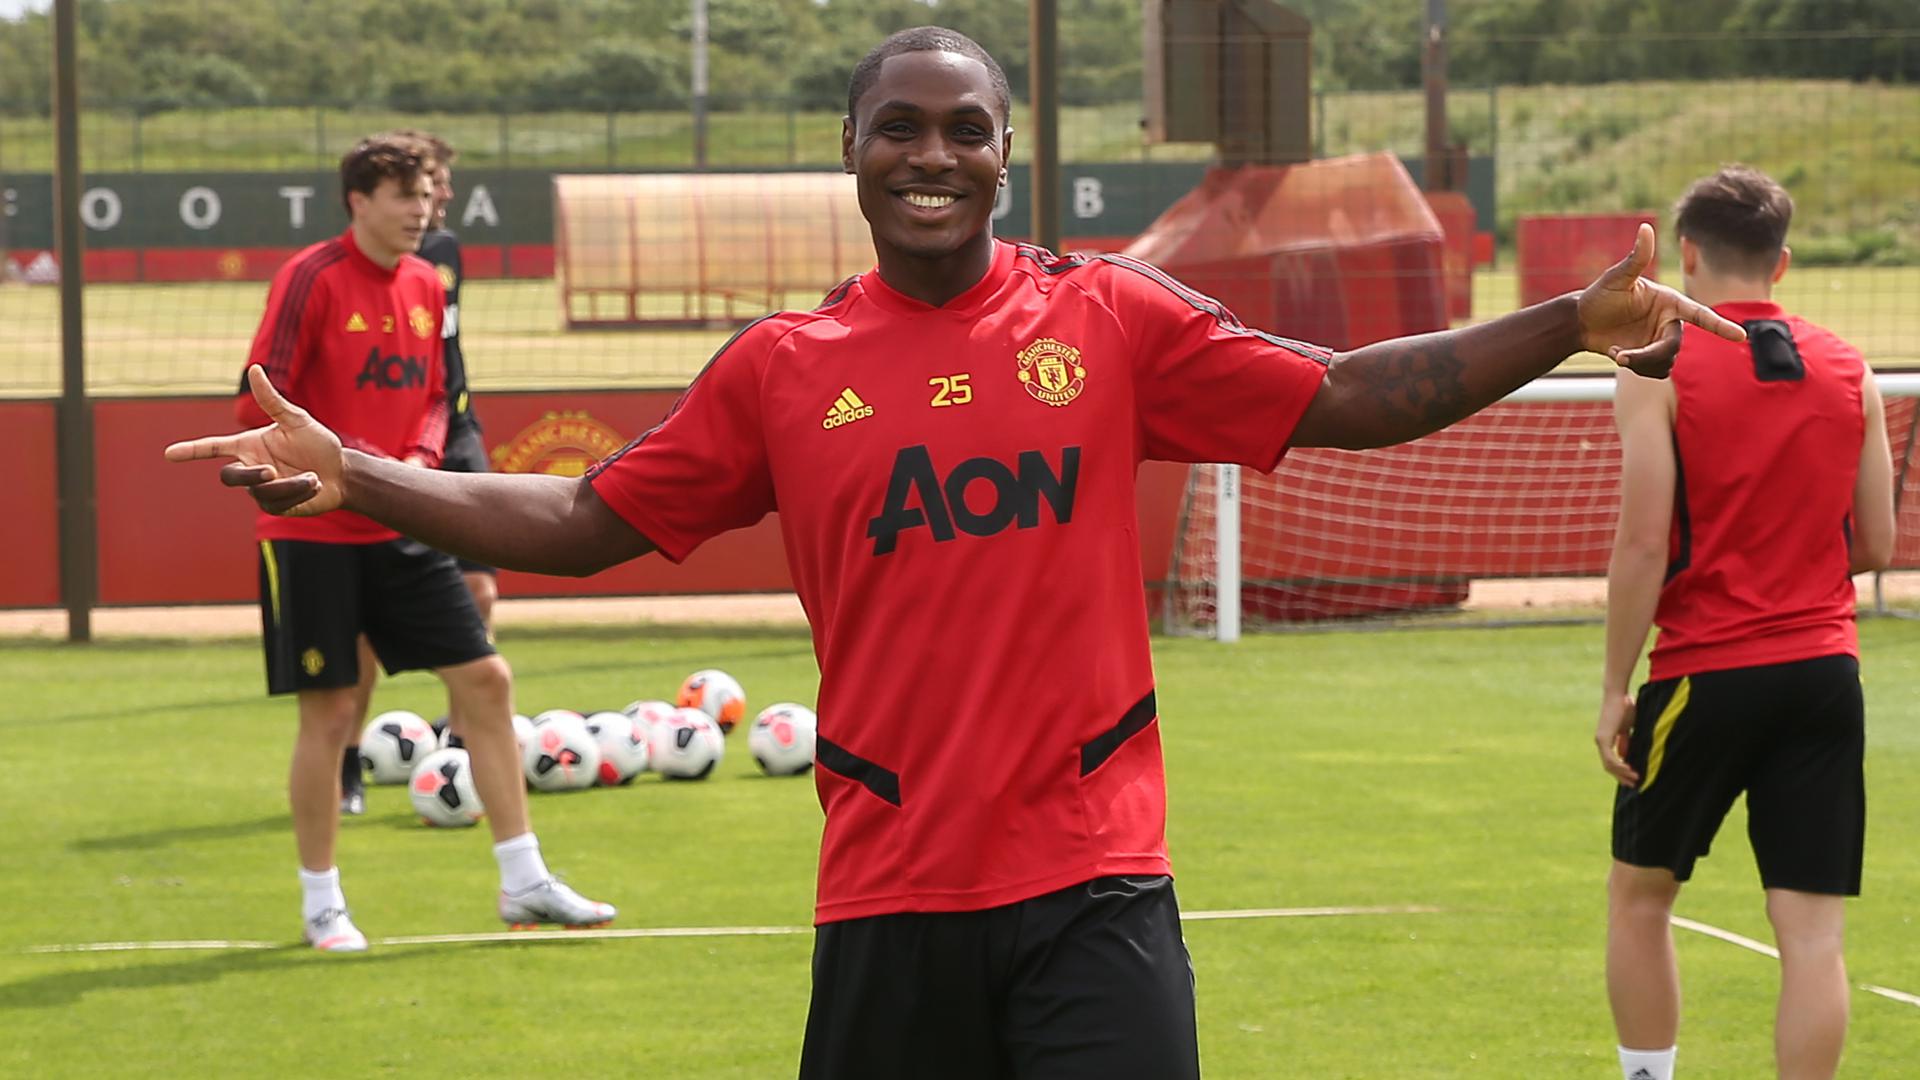 First Team Photos From The Aon Training Complex 22 June 2020